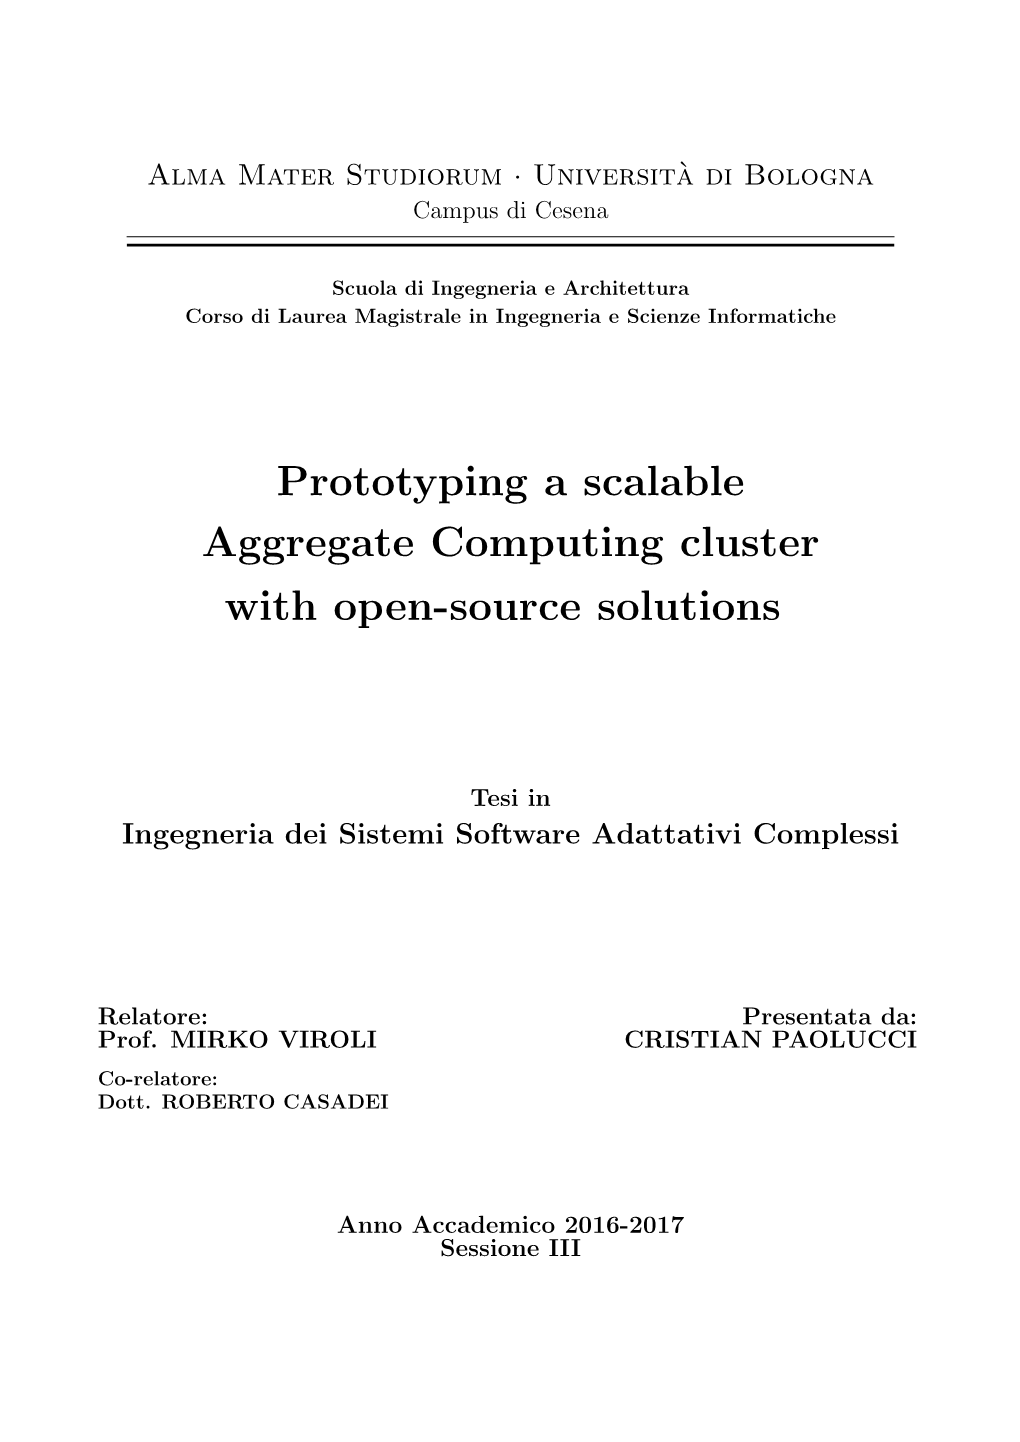 Prototyping a Scalable Aggregate Computing Cluster with Open-Source Solutions